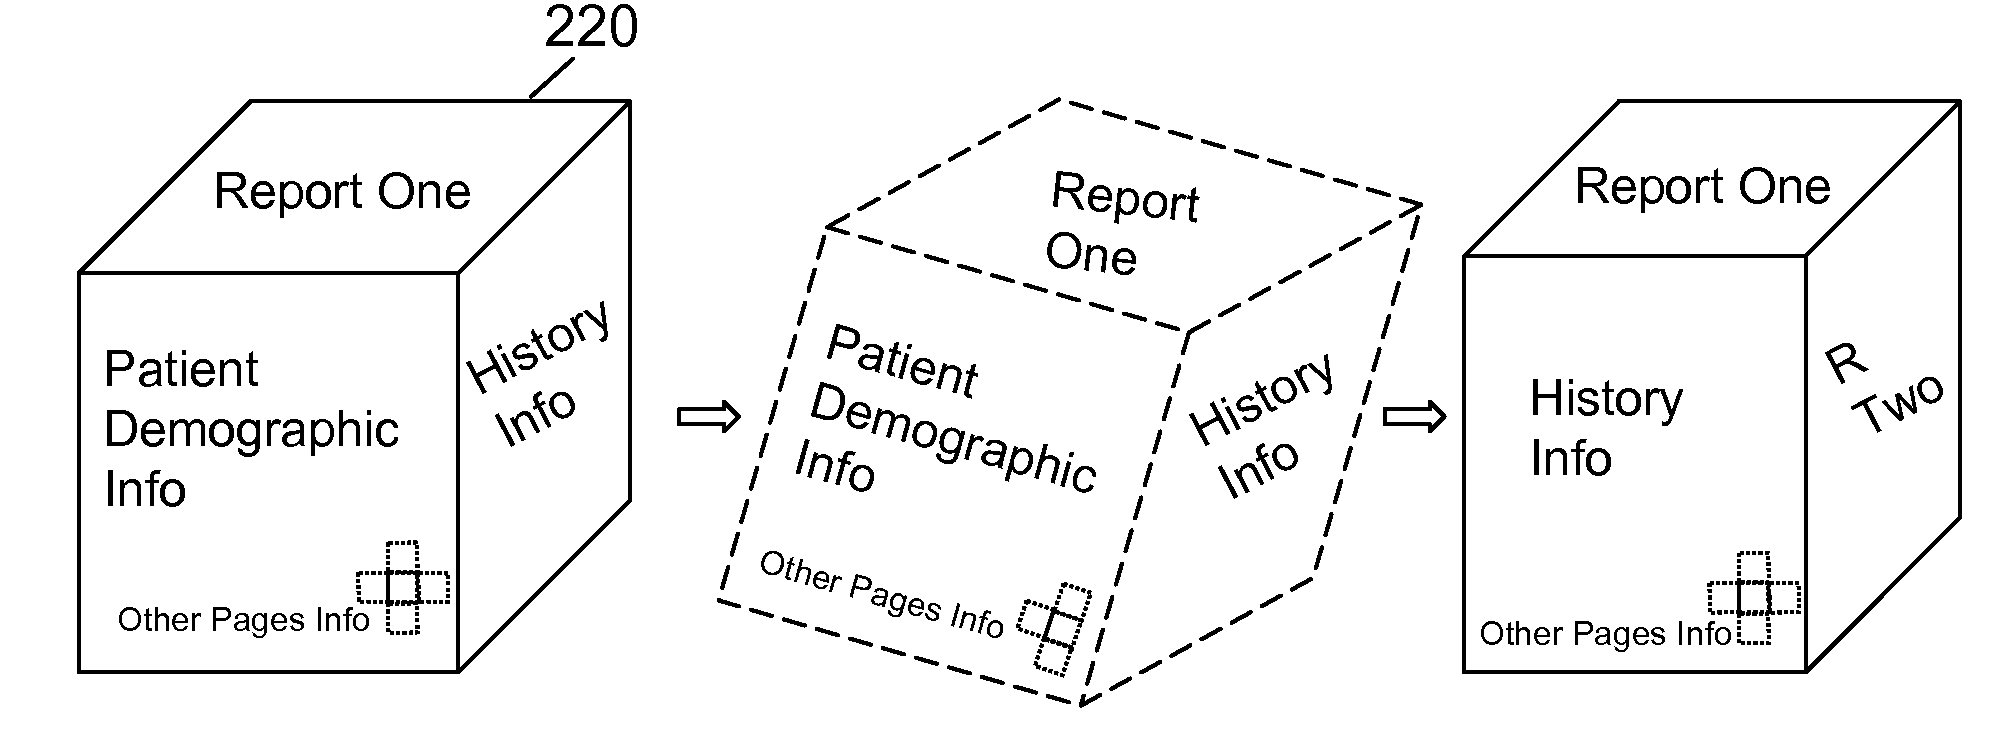 Information processing device and integrated information system